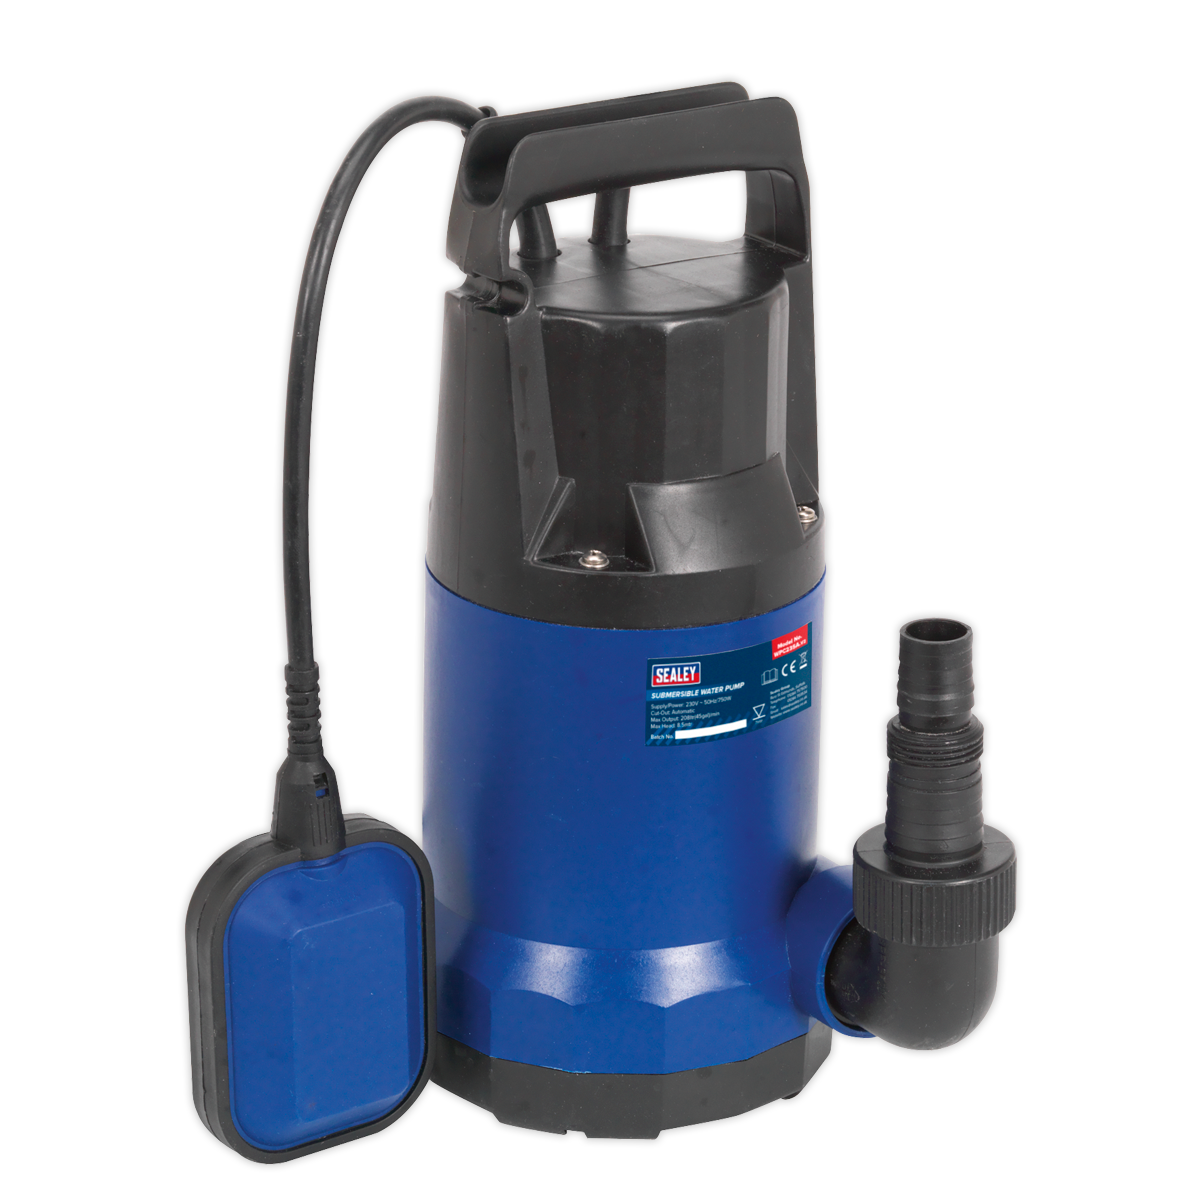 Sealey Submersible Water Pump Automatic 208L/min 230V